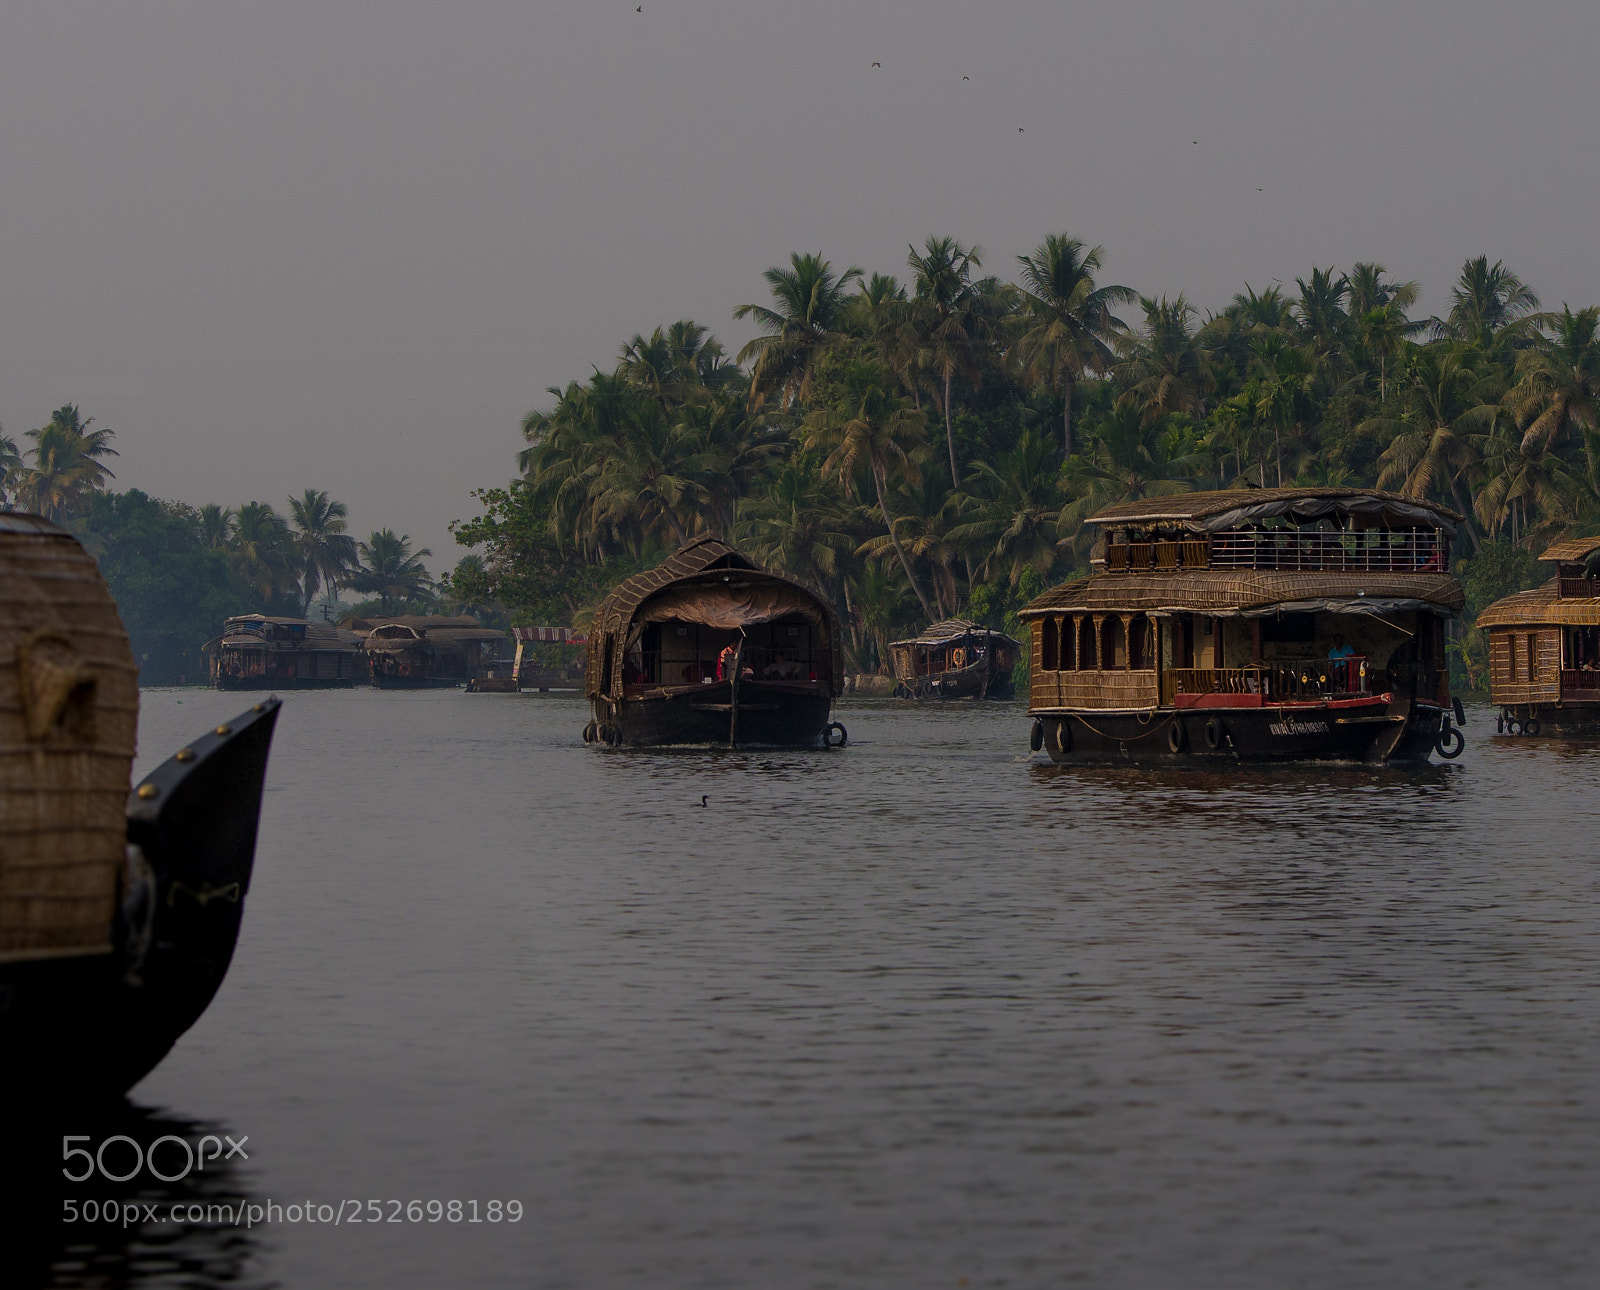 Pentax K-1 sample photo. Allapey boats in india photography